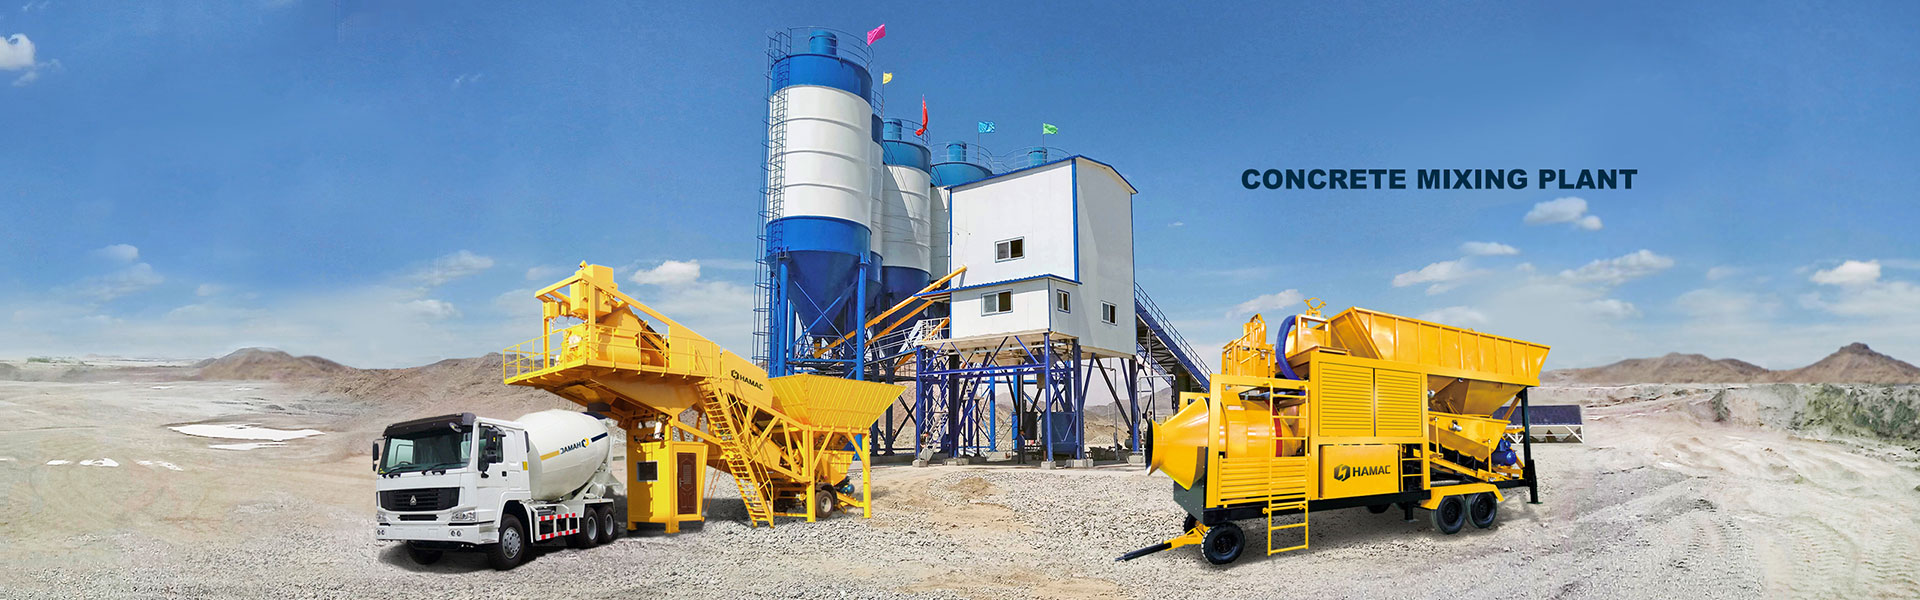 Concrete Batching Plant for Sale in HAMAC